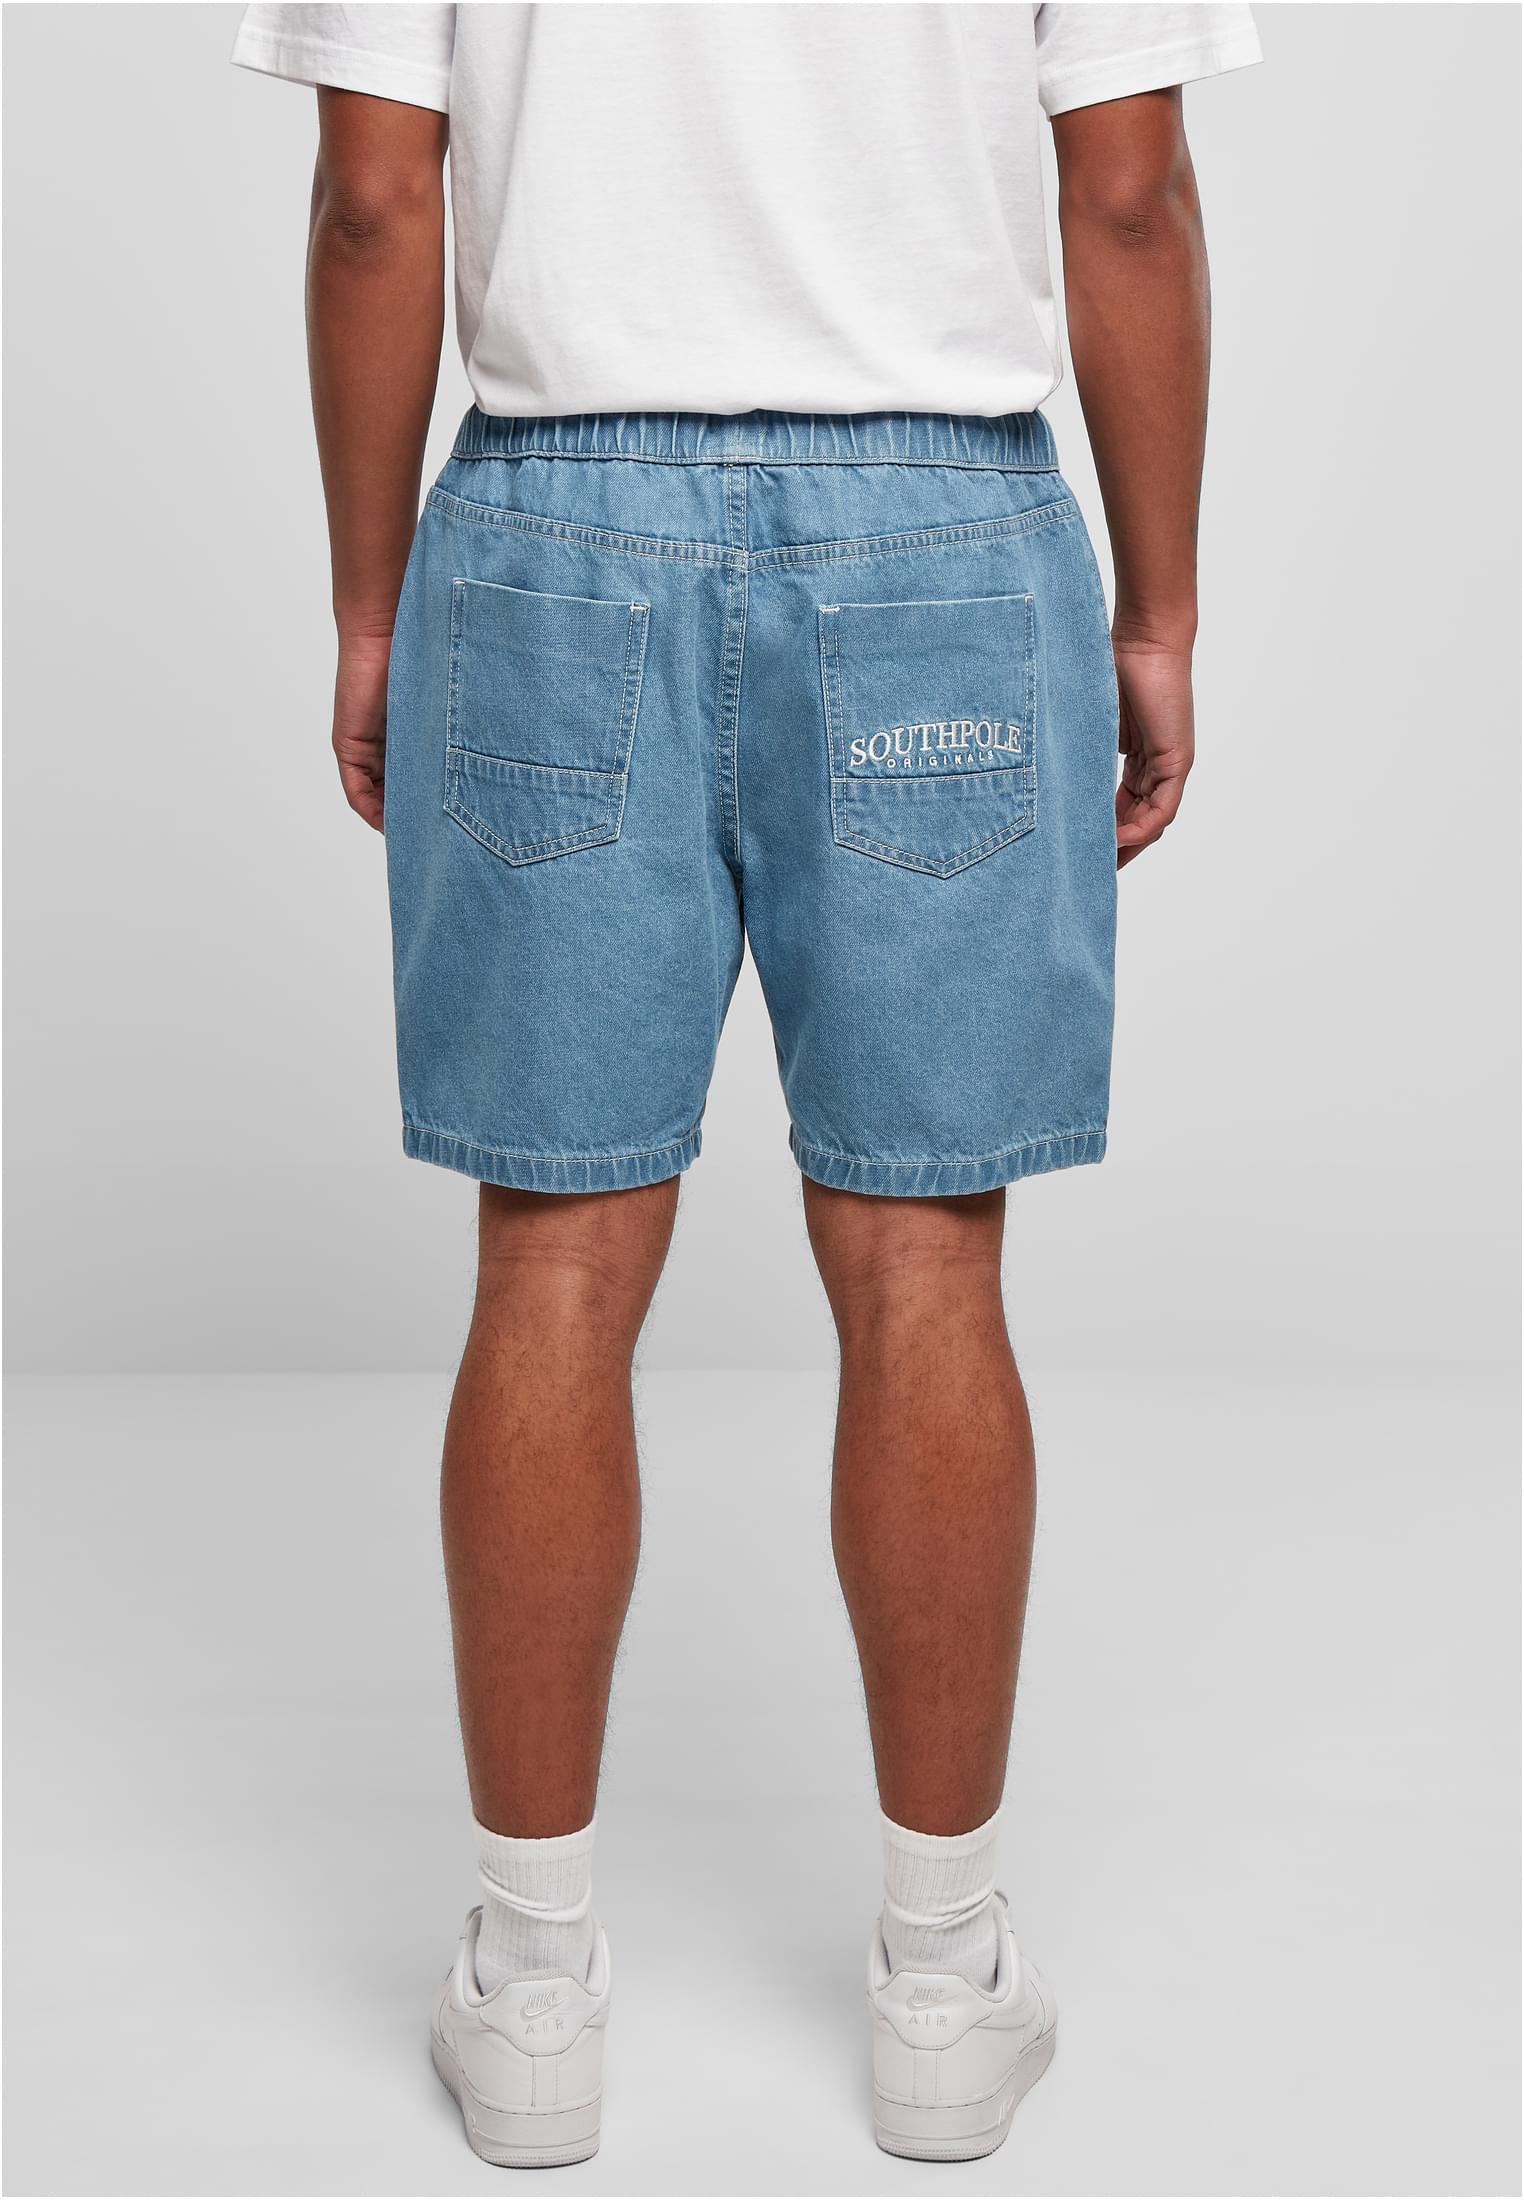 Saisonware Southpole Denim Shorts in Farbe midblue washed